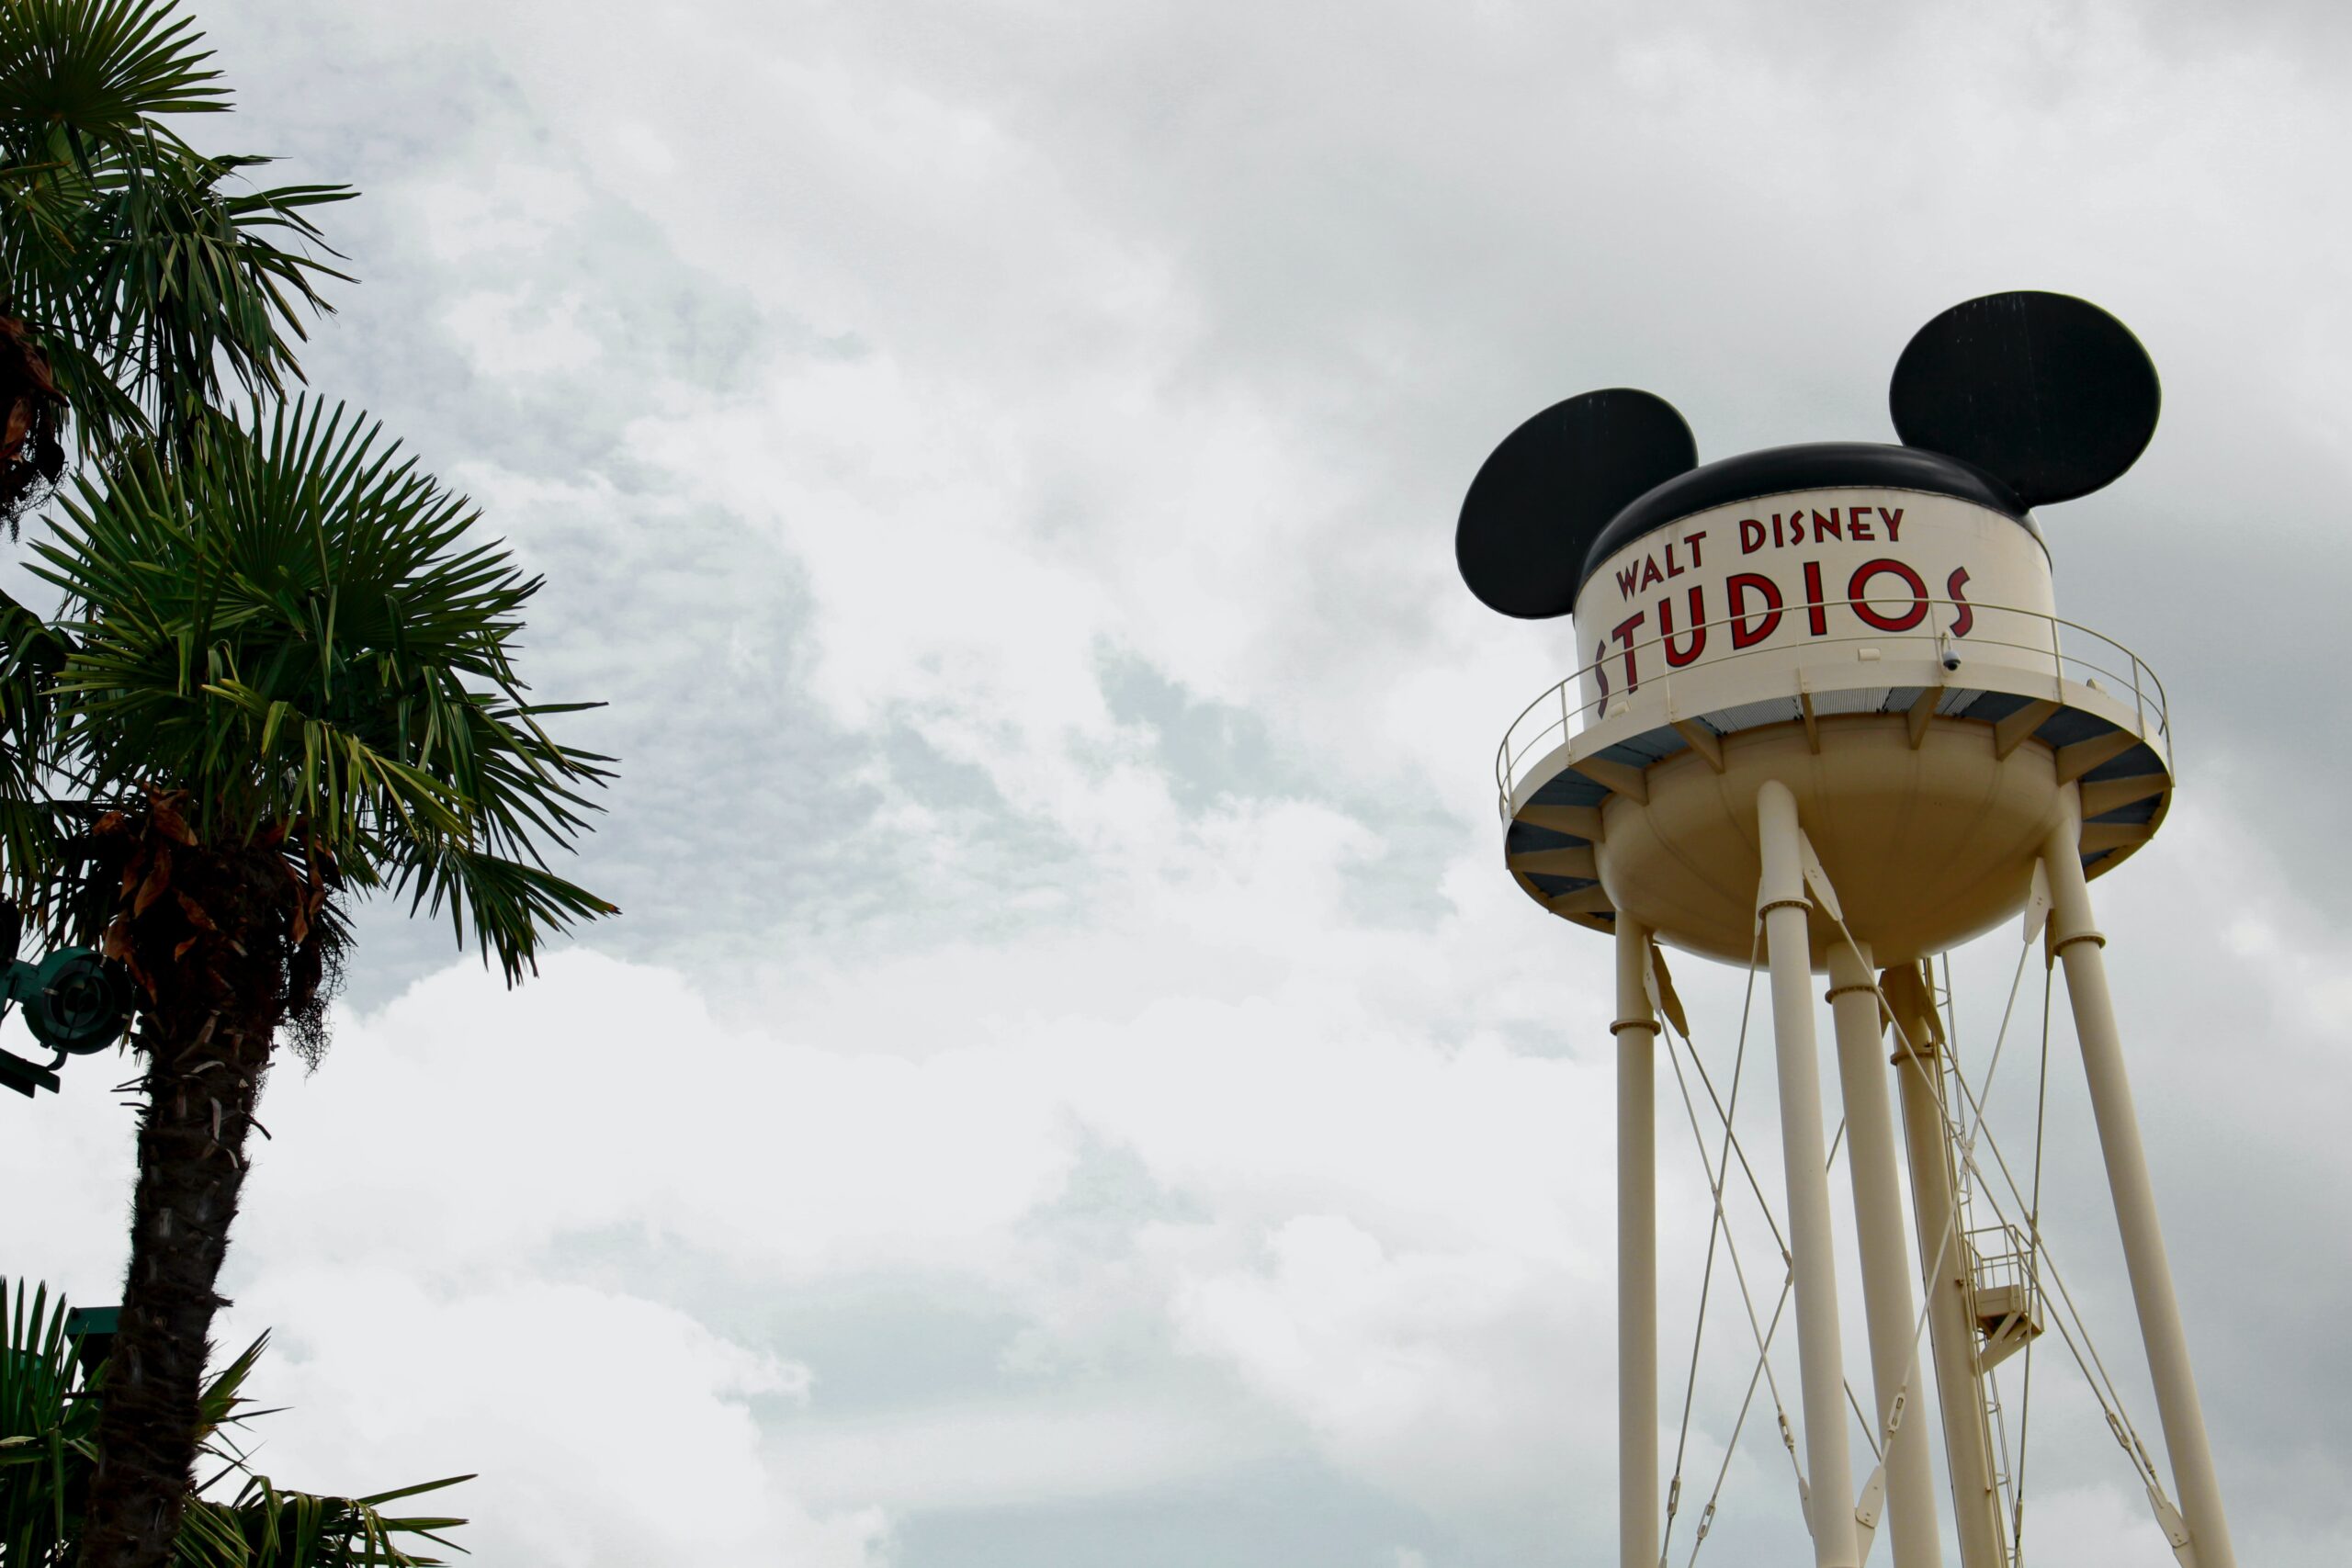 These hotels with fun themes that kids will love are located all over the world. 
pictured: a water tower with Walt Disney Studios decor